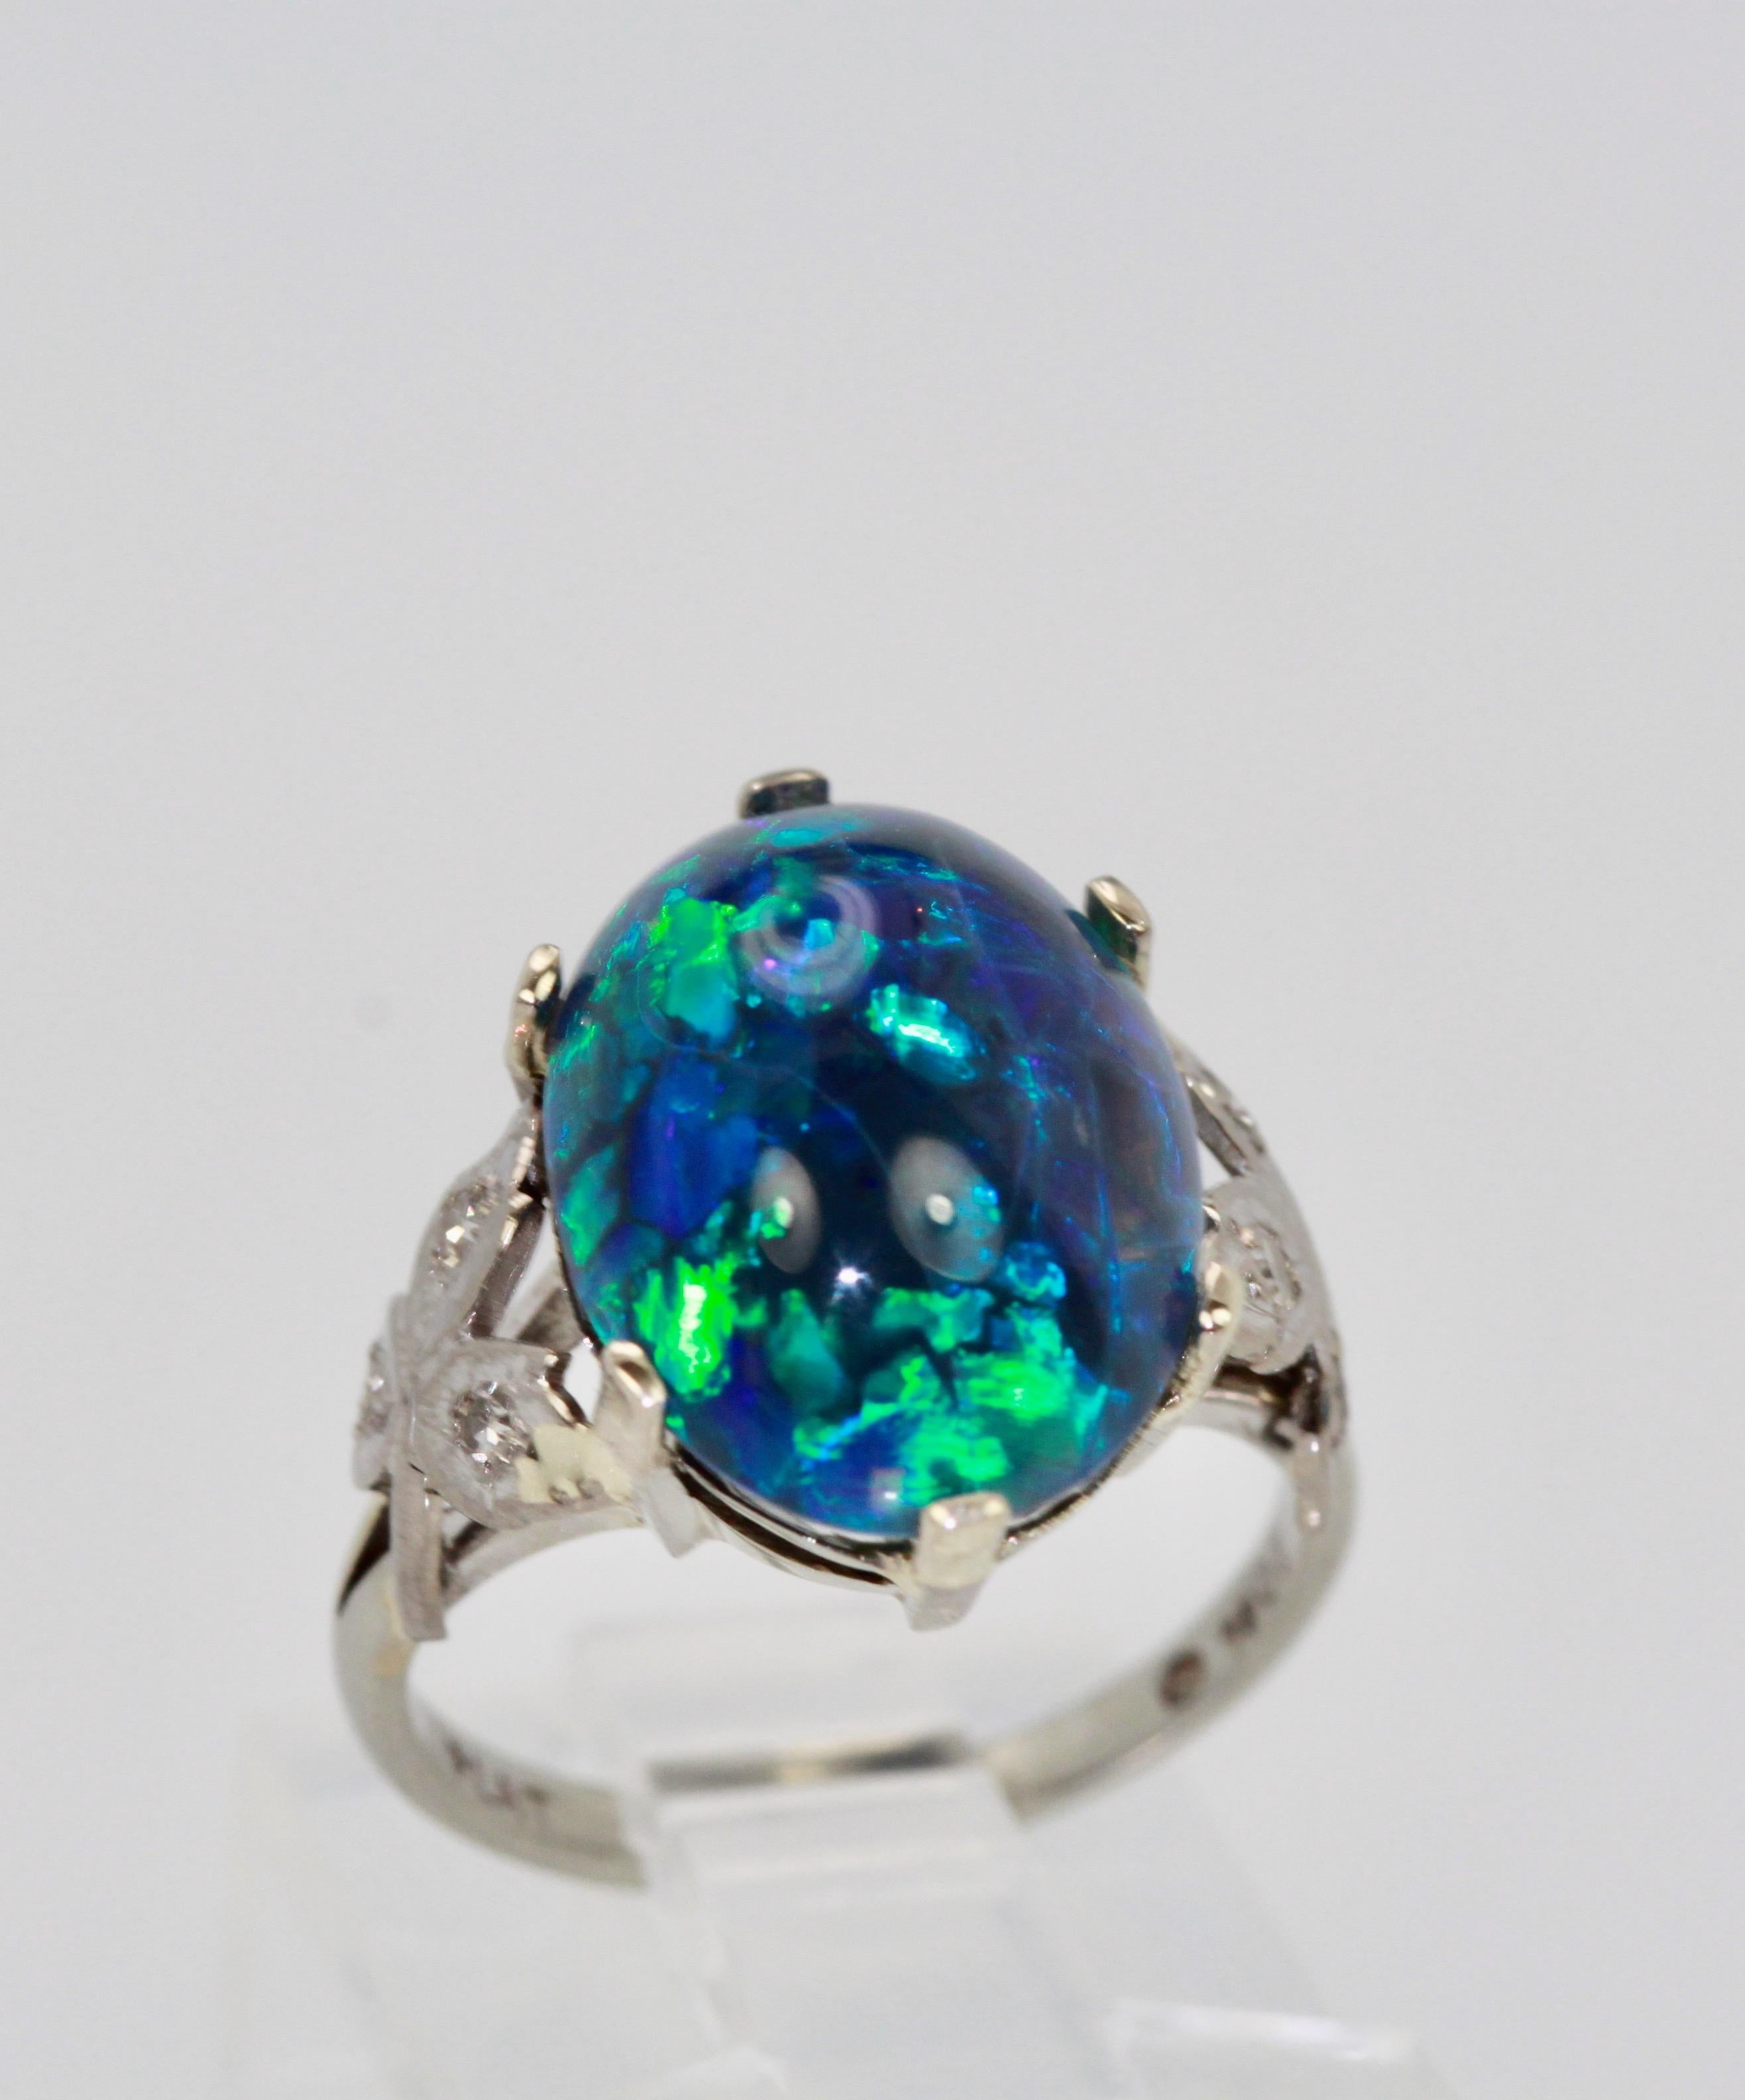 This black Opal Platinum ring is set with 3 small Diamonds on each of the sides with a leaf design.  The Opal measures 14.3 x 10.72 with a depth of 6.02. It is oval with a lovely Matrix of deep blues a bit if green and ever so slight red.  Currently